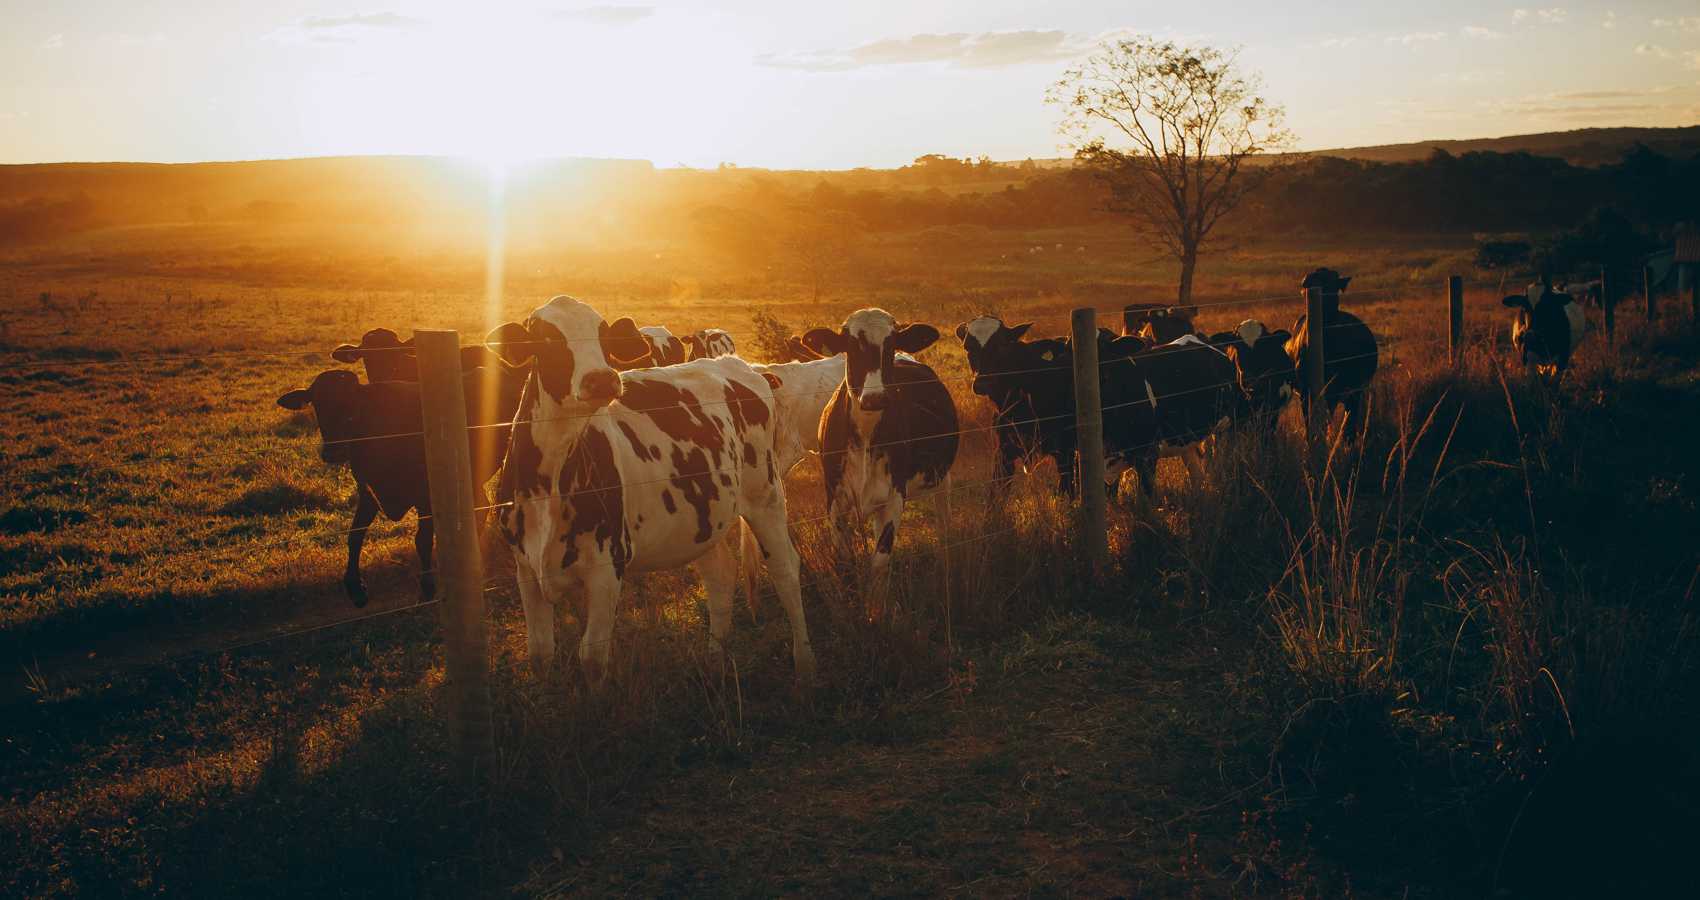 Delight of Cows, poetry by Elizabeth Barton at Spillwords.com